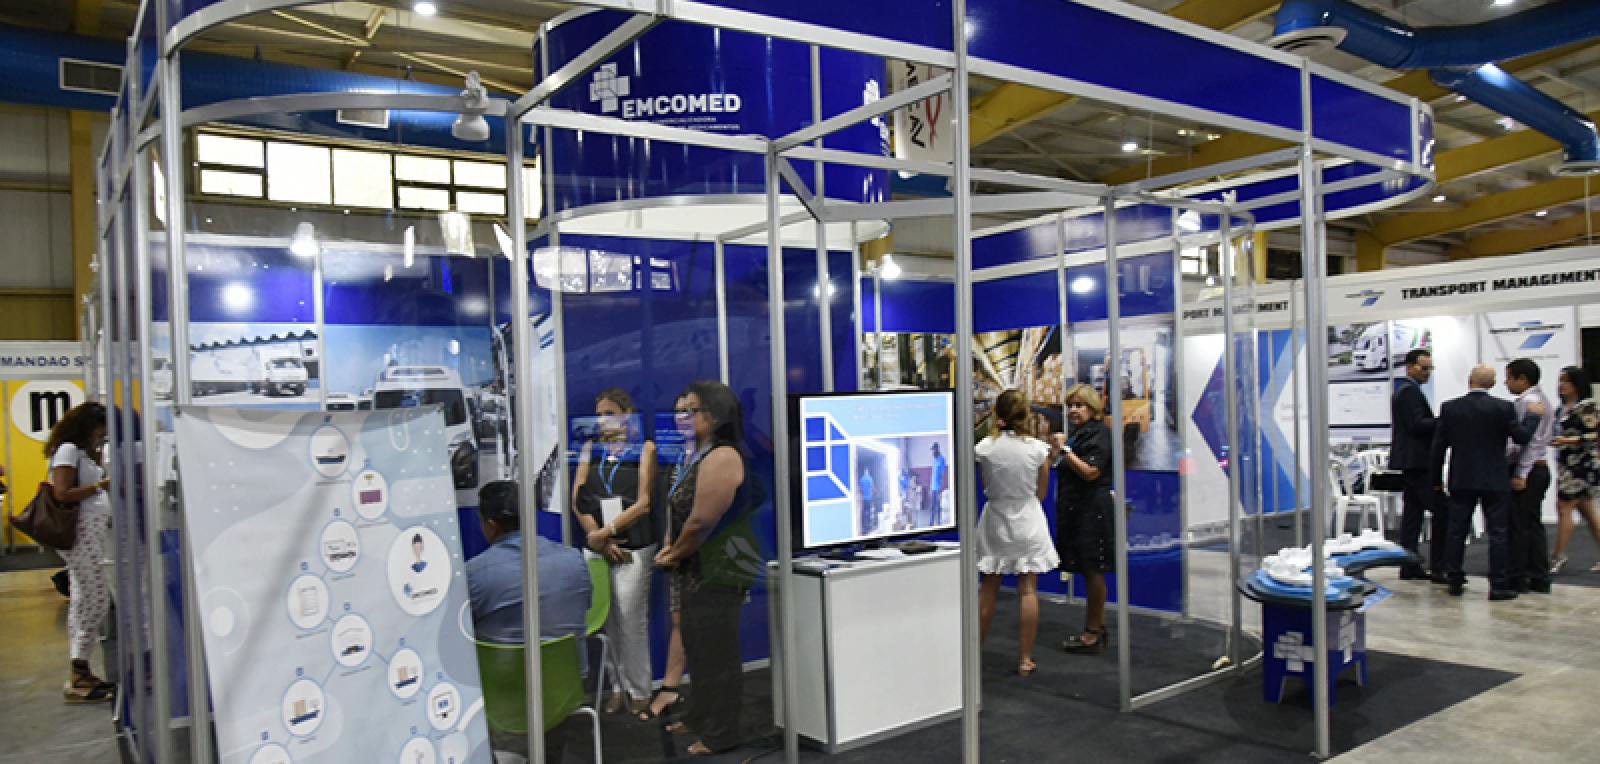 Emcomed attends the International Transport and Logistics Fair at Pabexpo